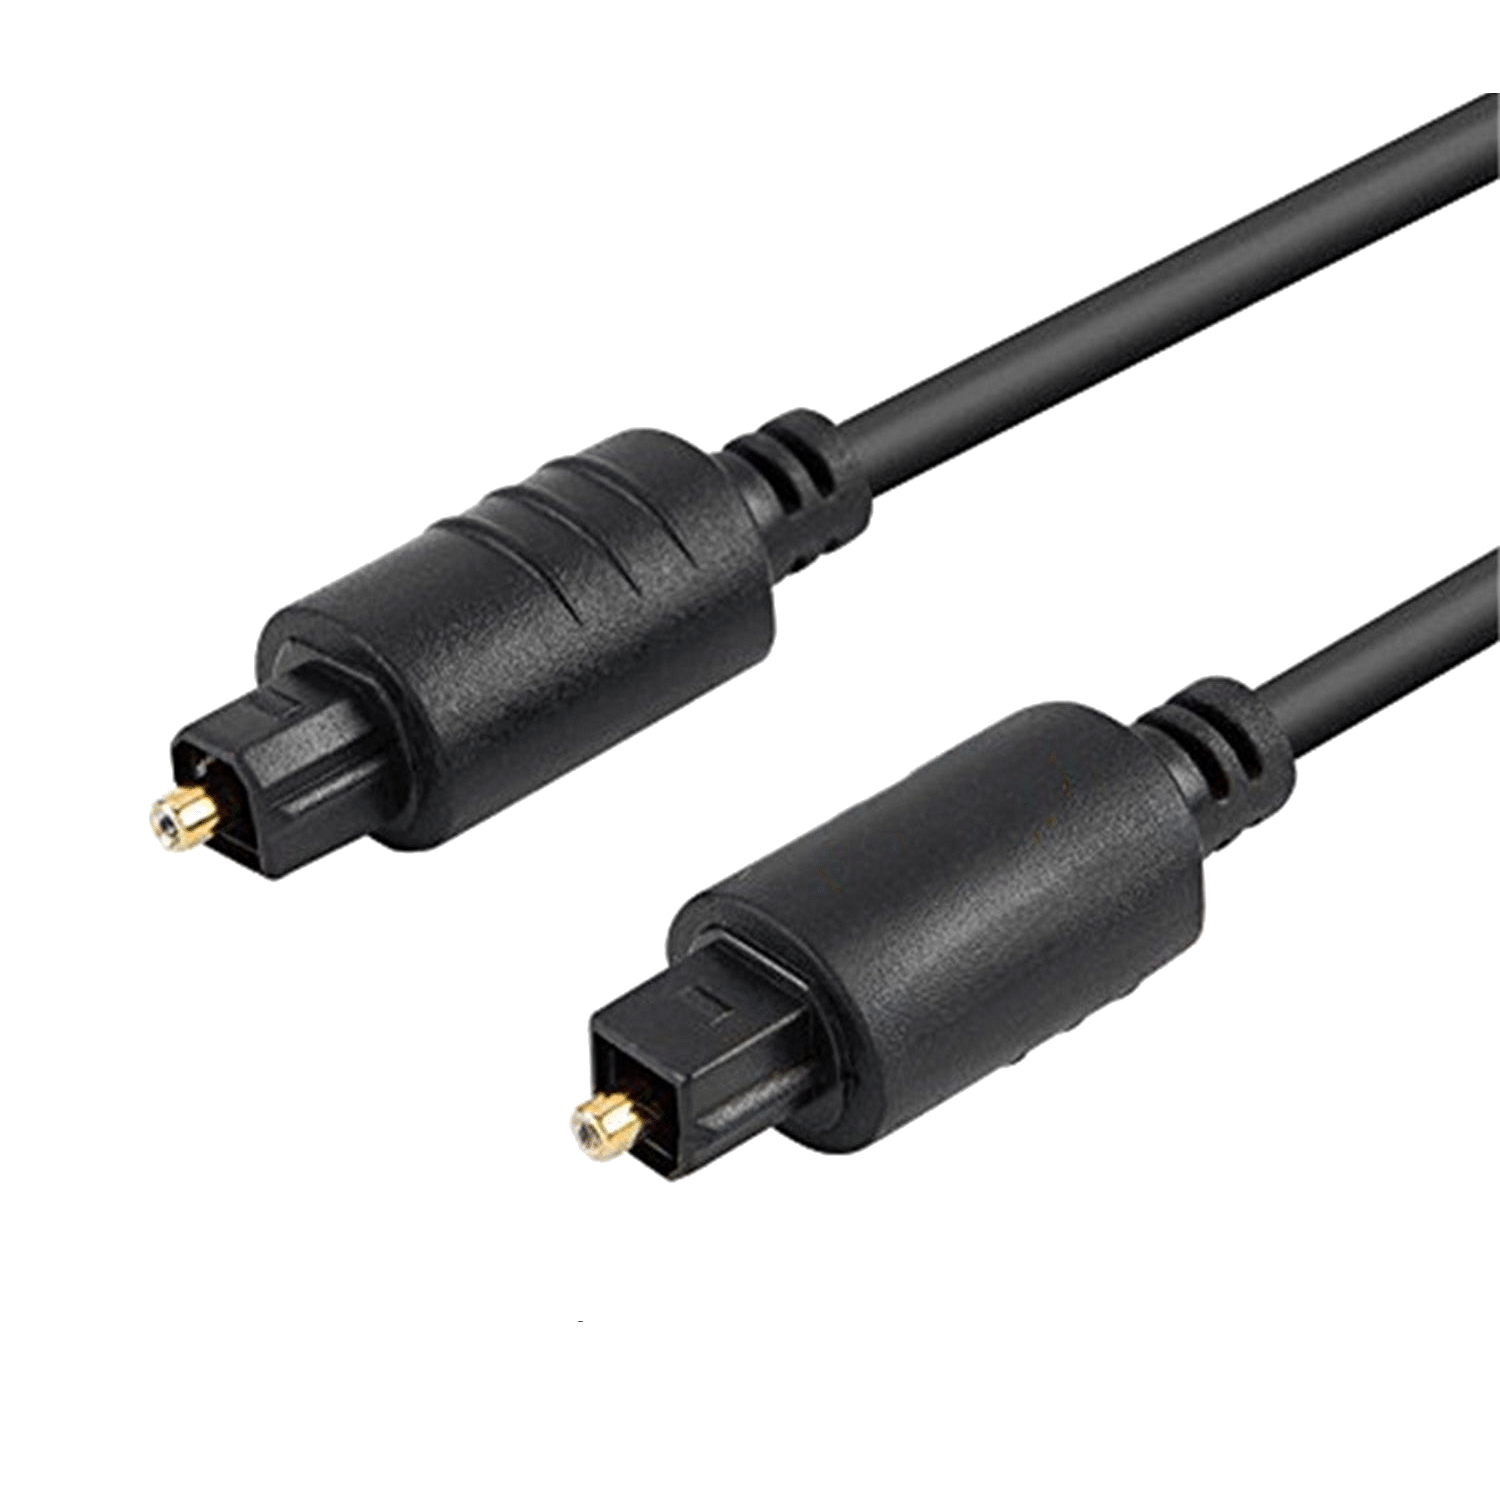 optical audio cable 5 meter